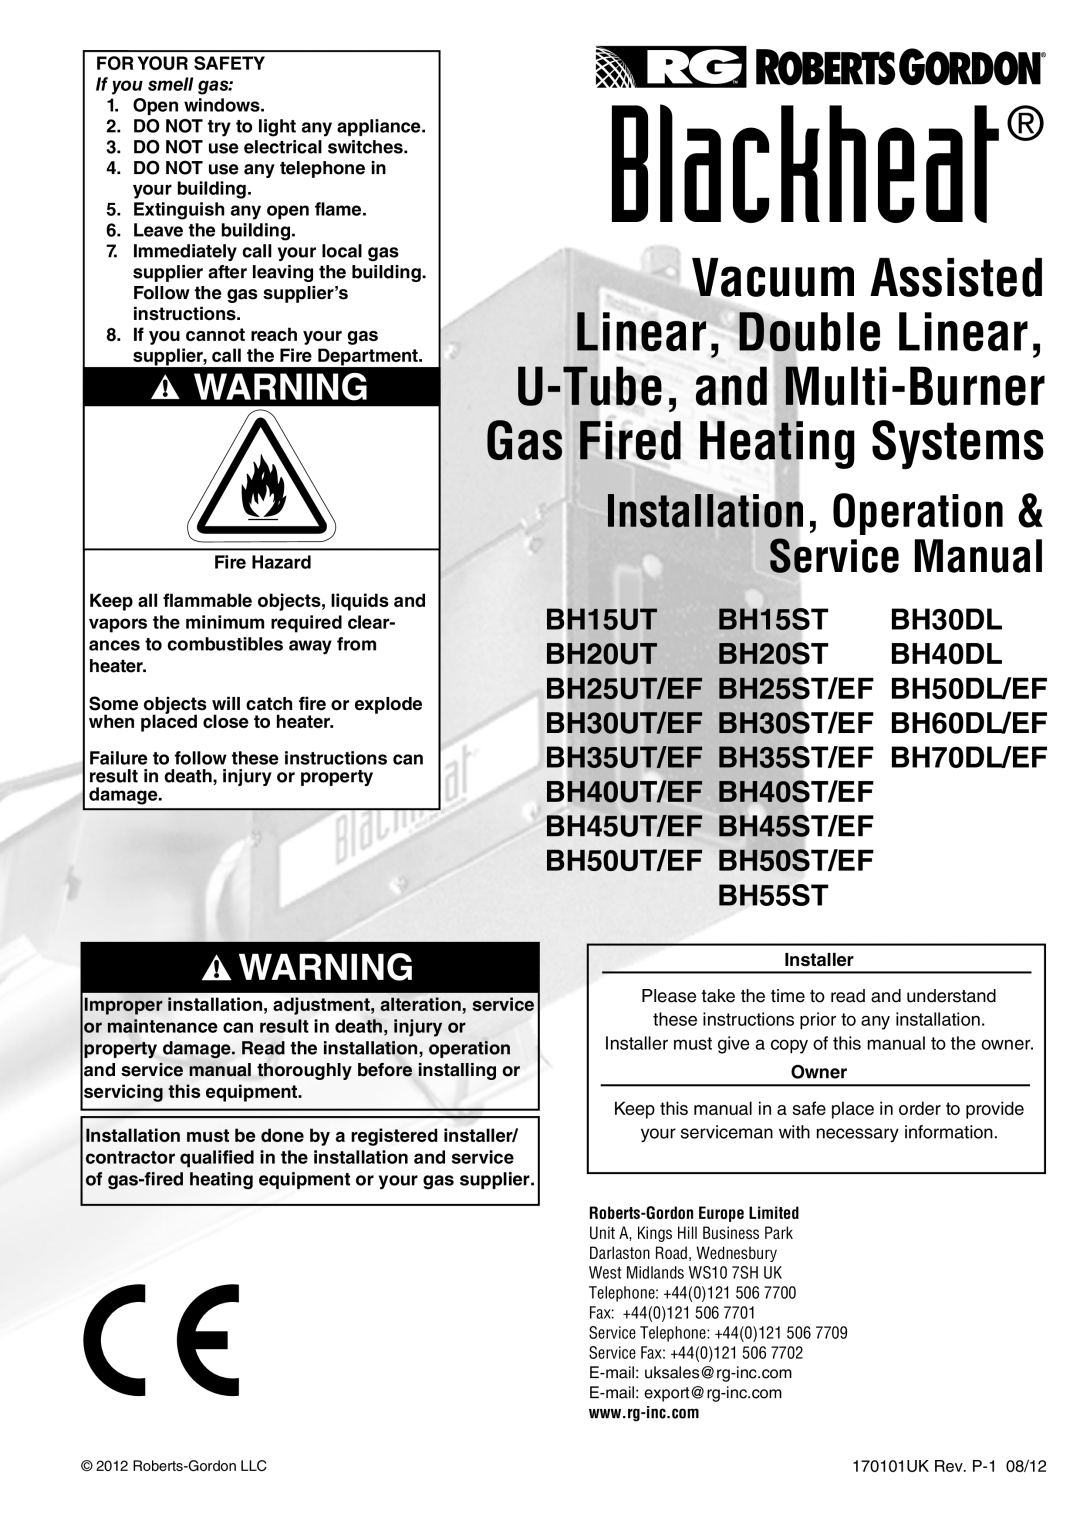 Roberts Gorden BH30UT/EF service manual Blackheat, Vacuum Assisted Linear, Double Linear, U-Tube,and Multi-Burner, BH55ST 